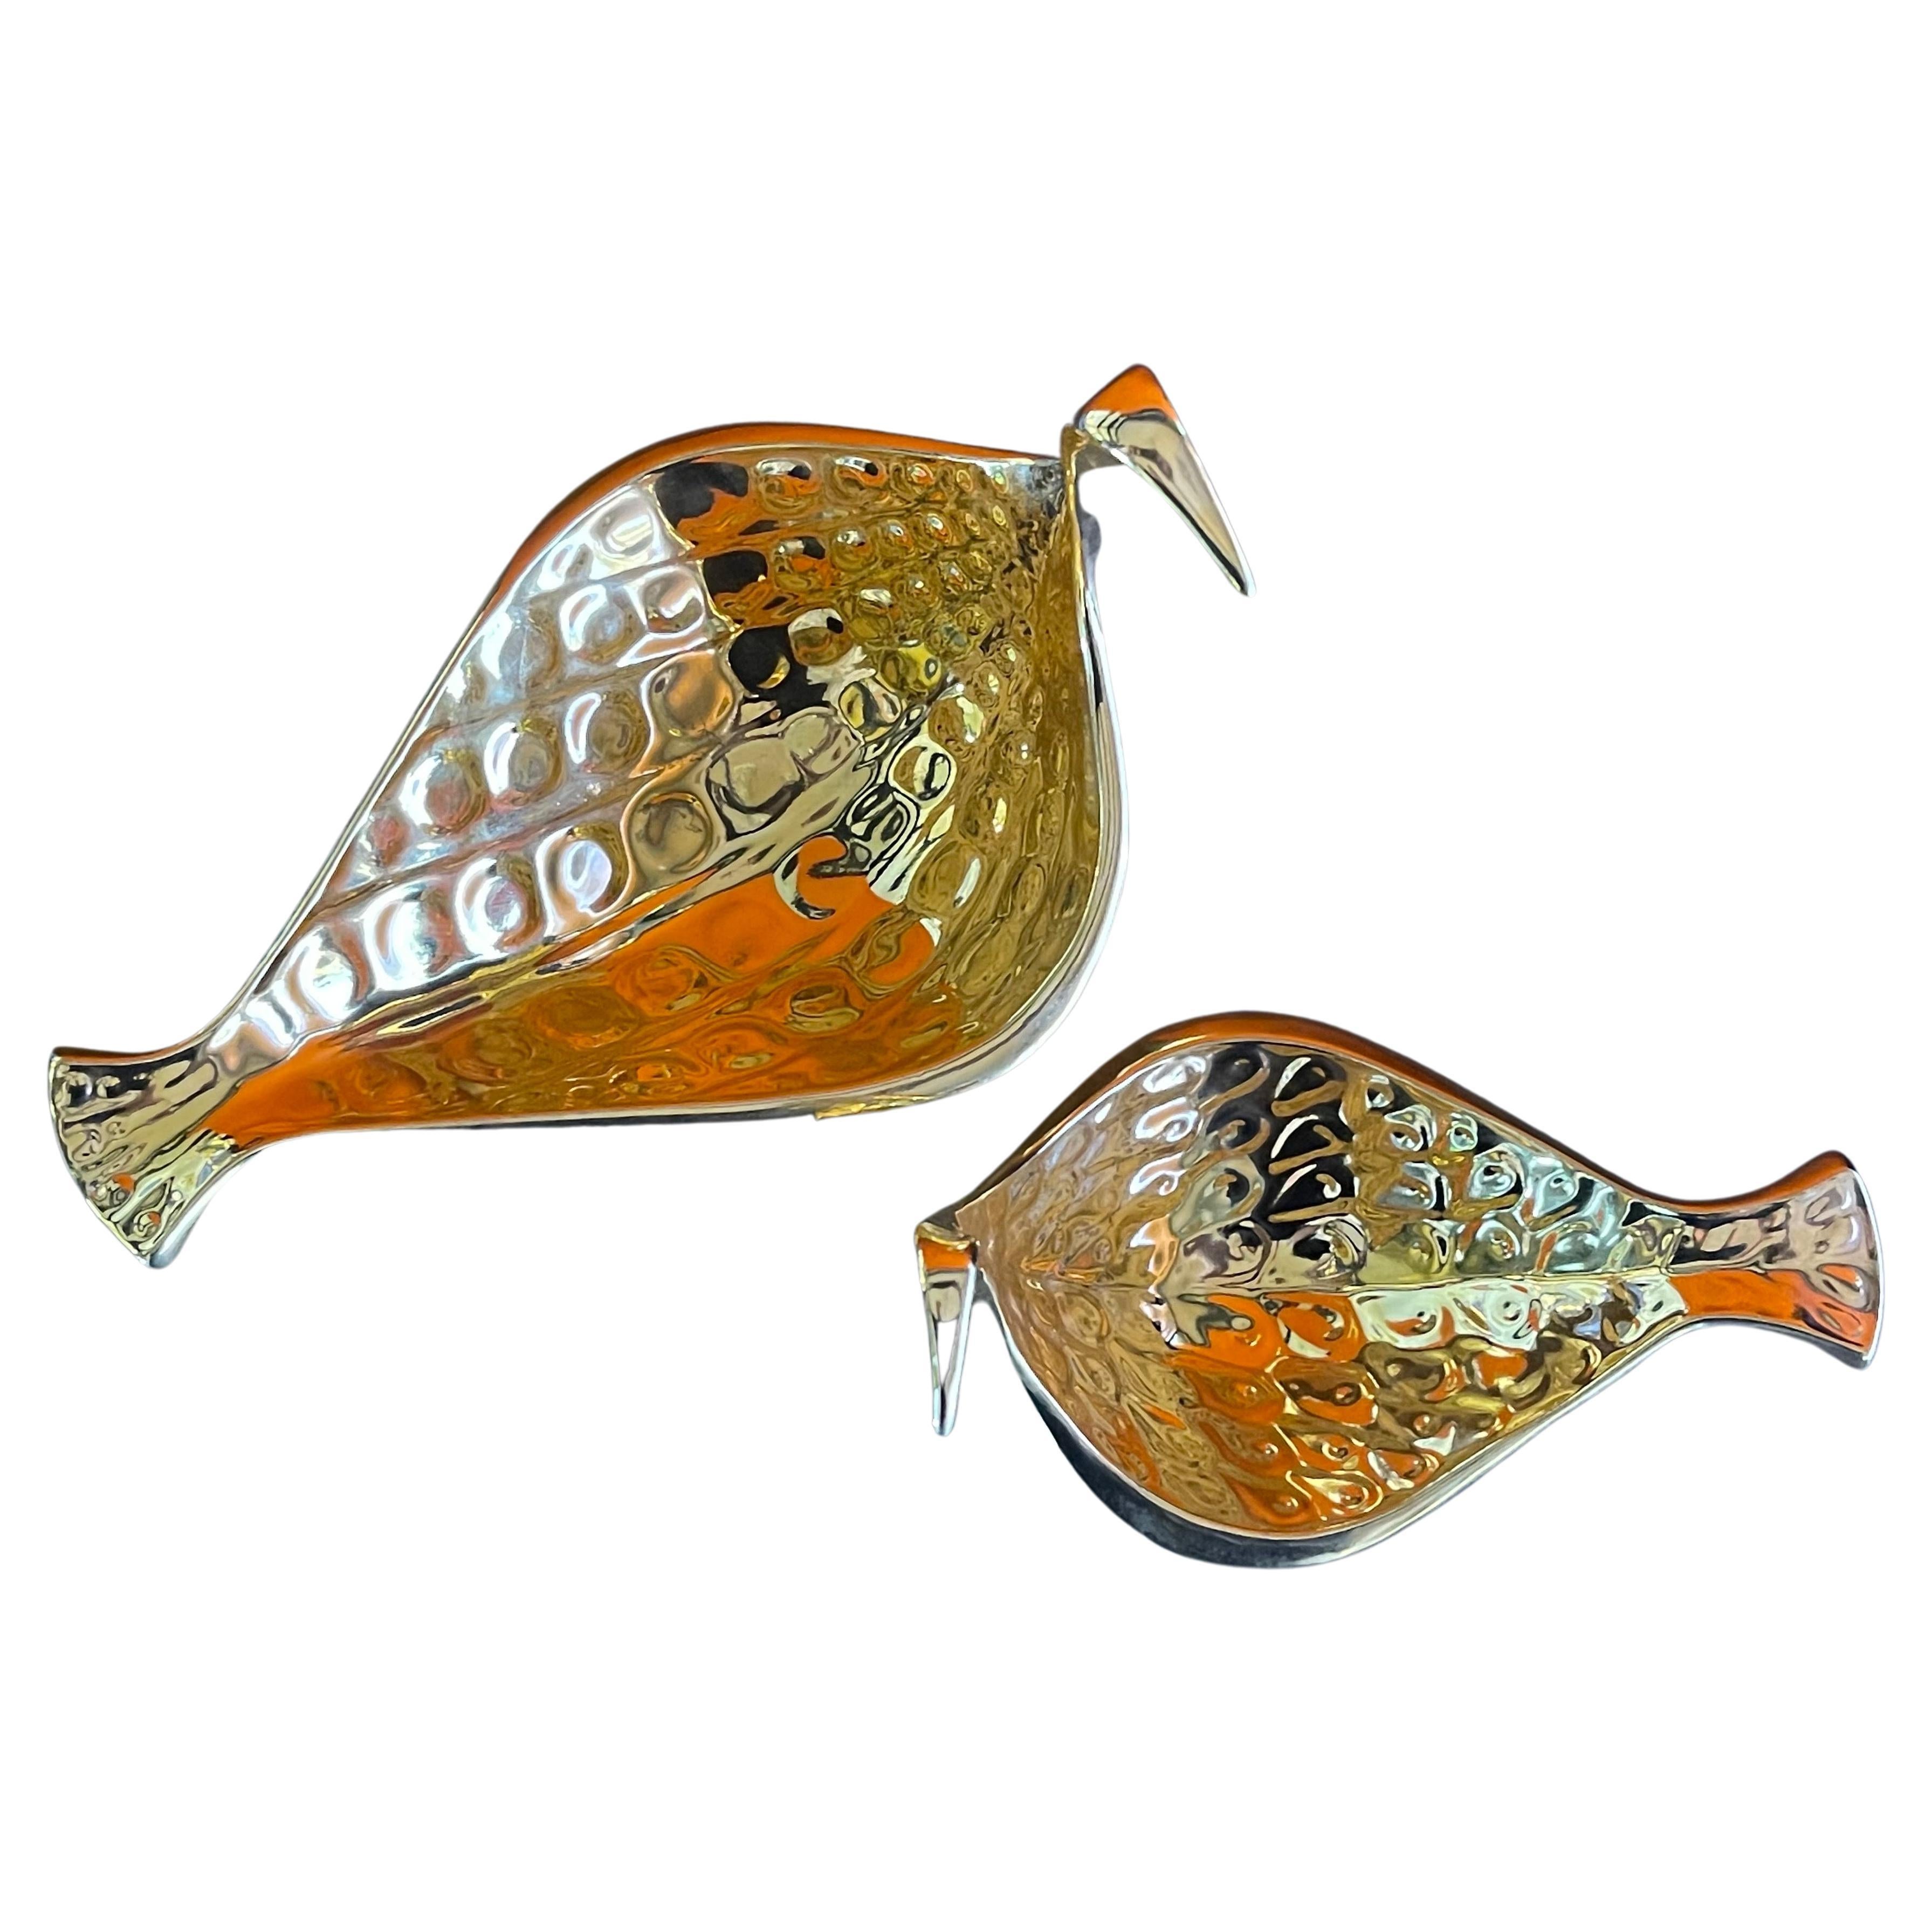 A lovely pair of bright gold ceramic bird bowls from the 